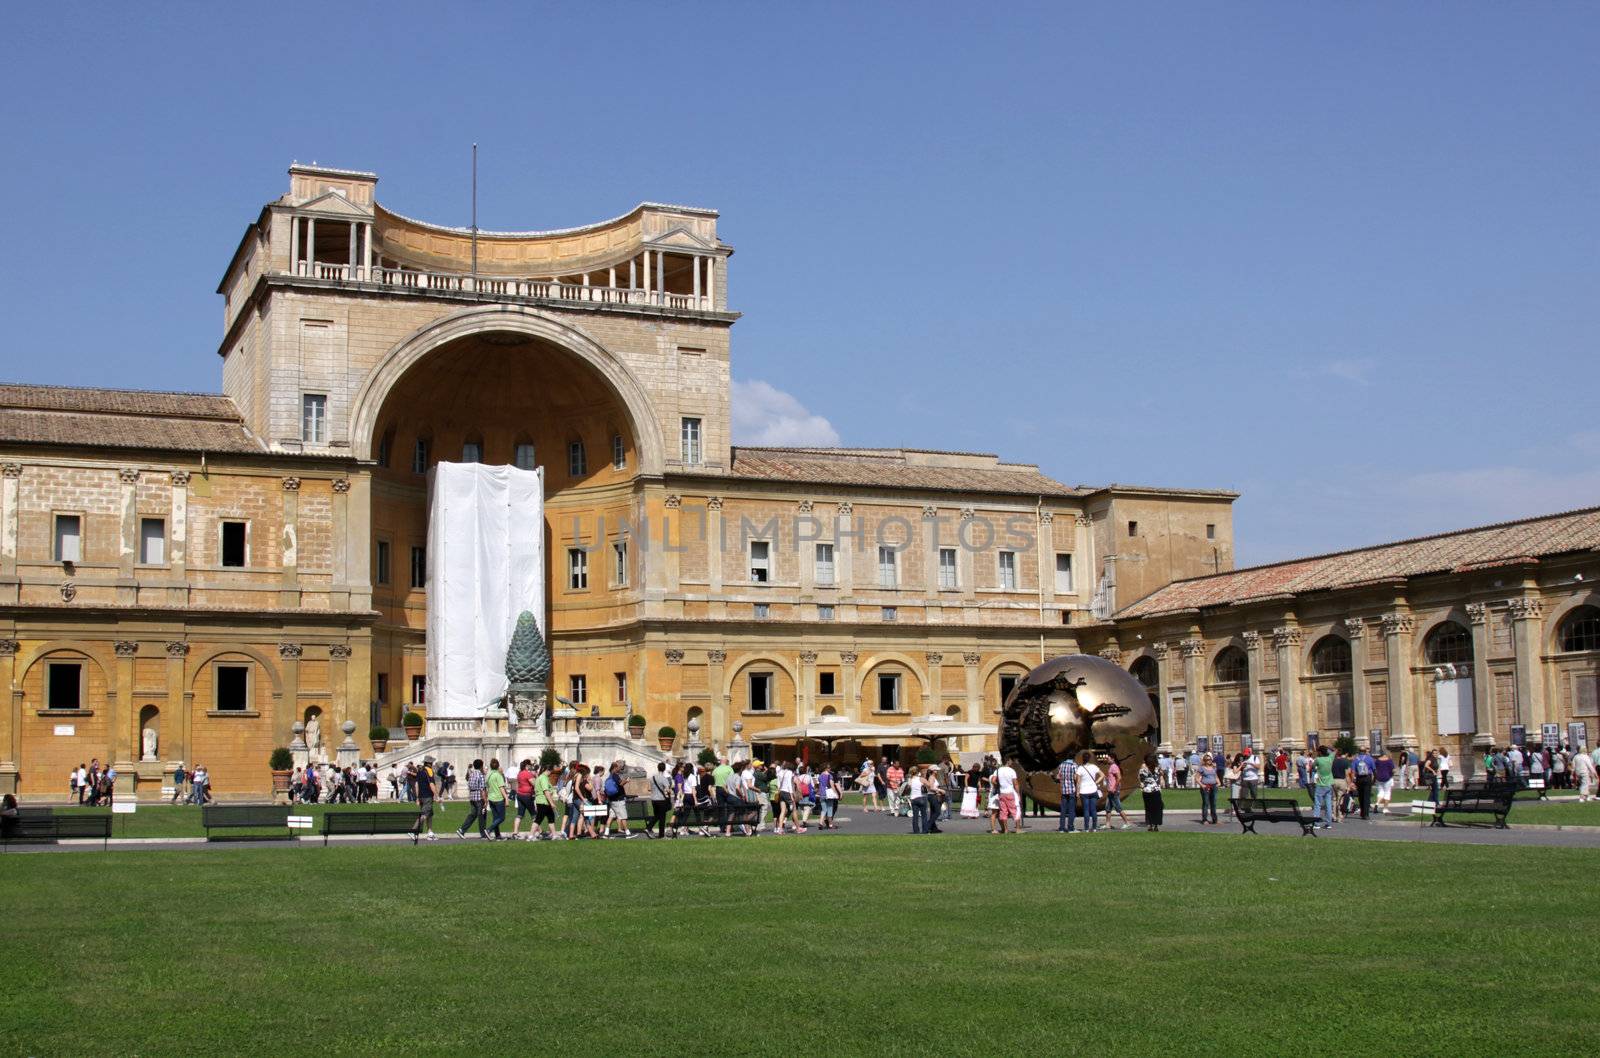 The courtyard of the Vatican Museums featuring the Sphere within Sphere by Arnaldo Pomodoro.